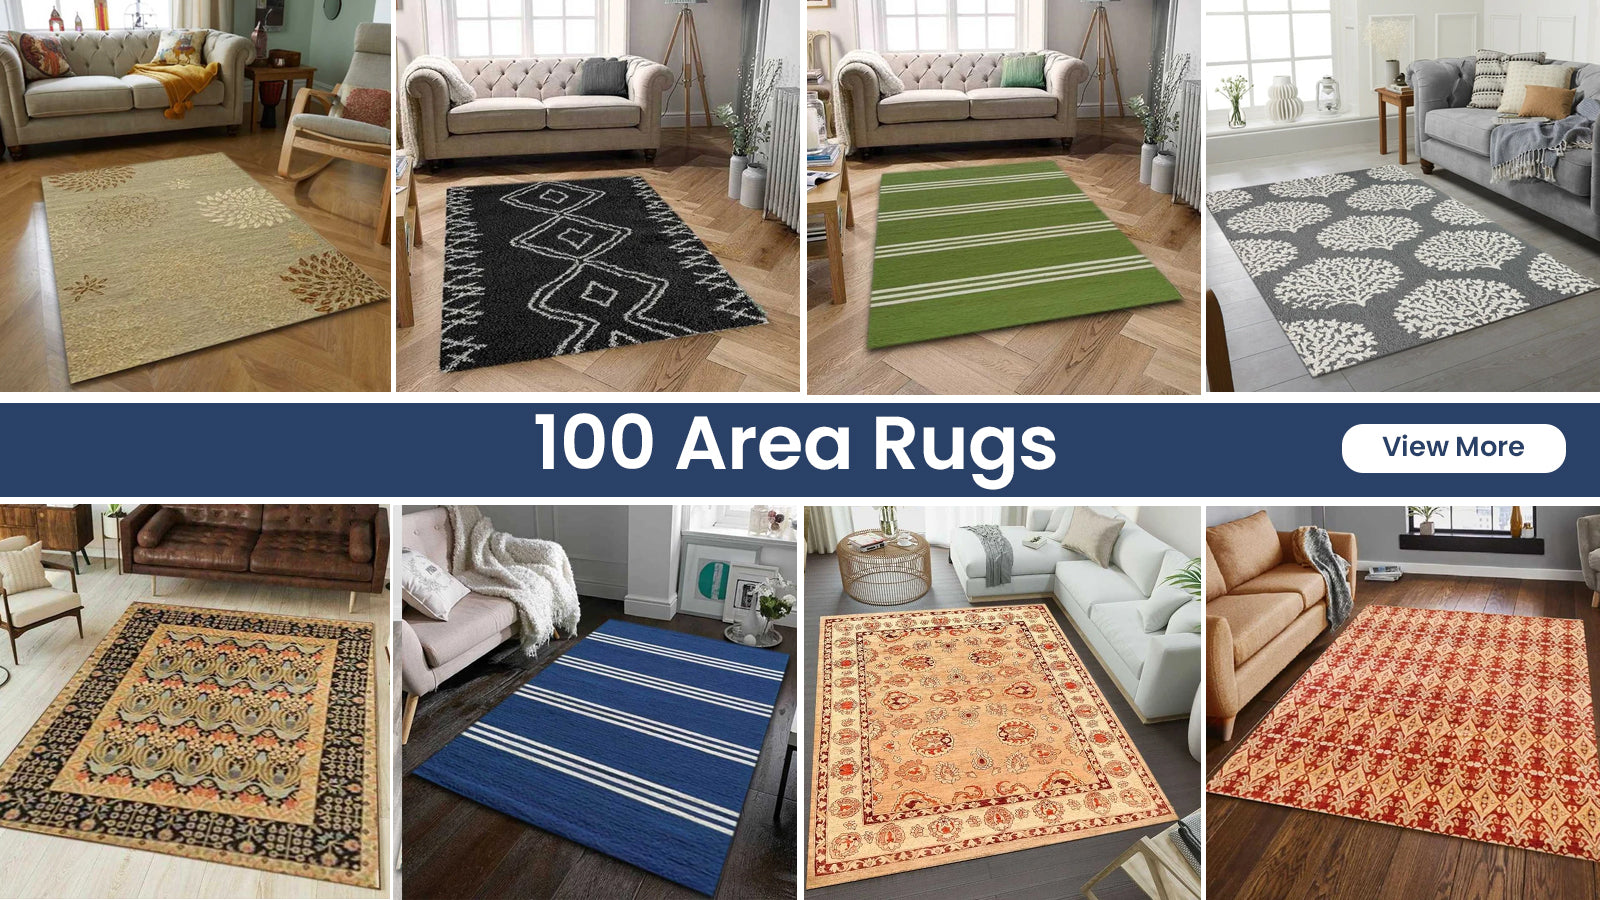 How to Secure Area Rug on Top of Carpet (So it Won't Bunch